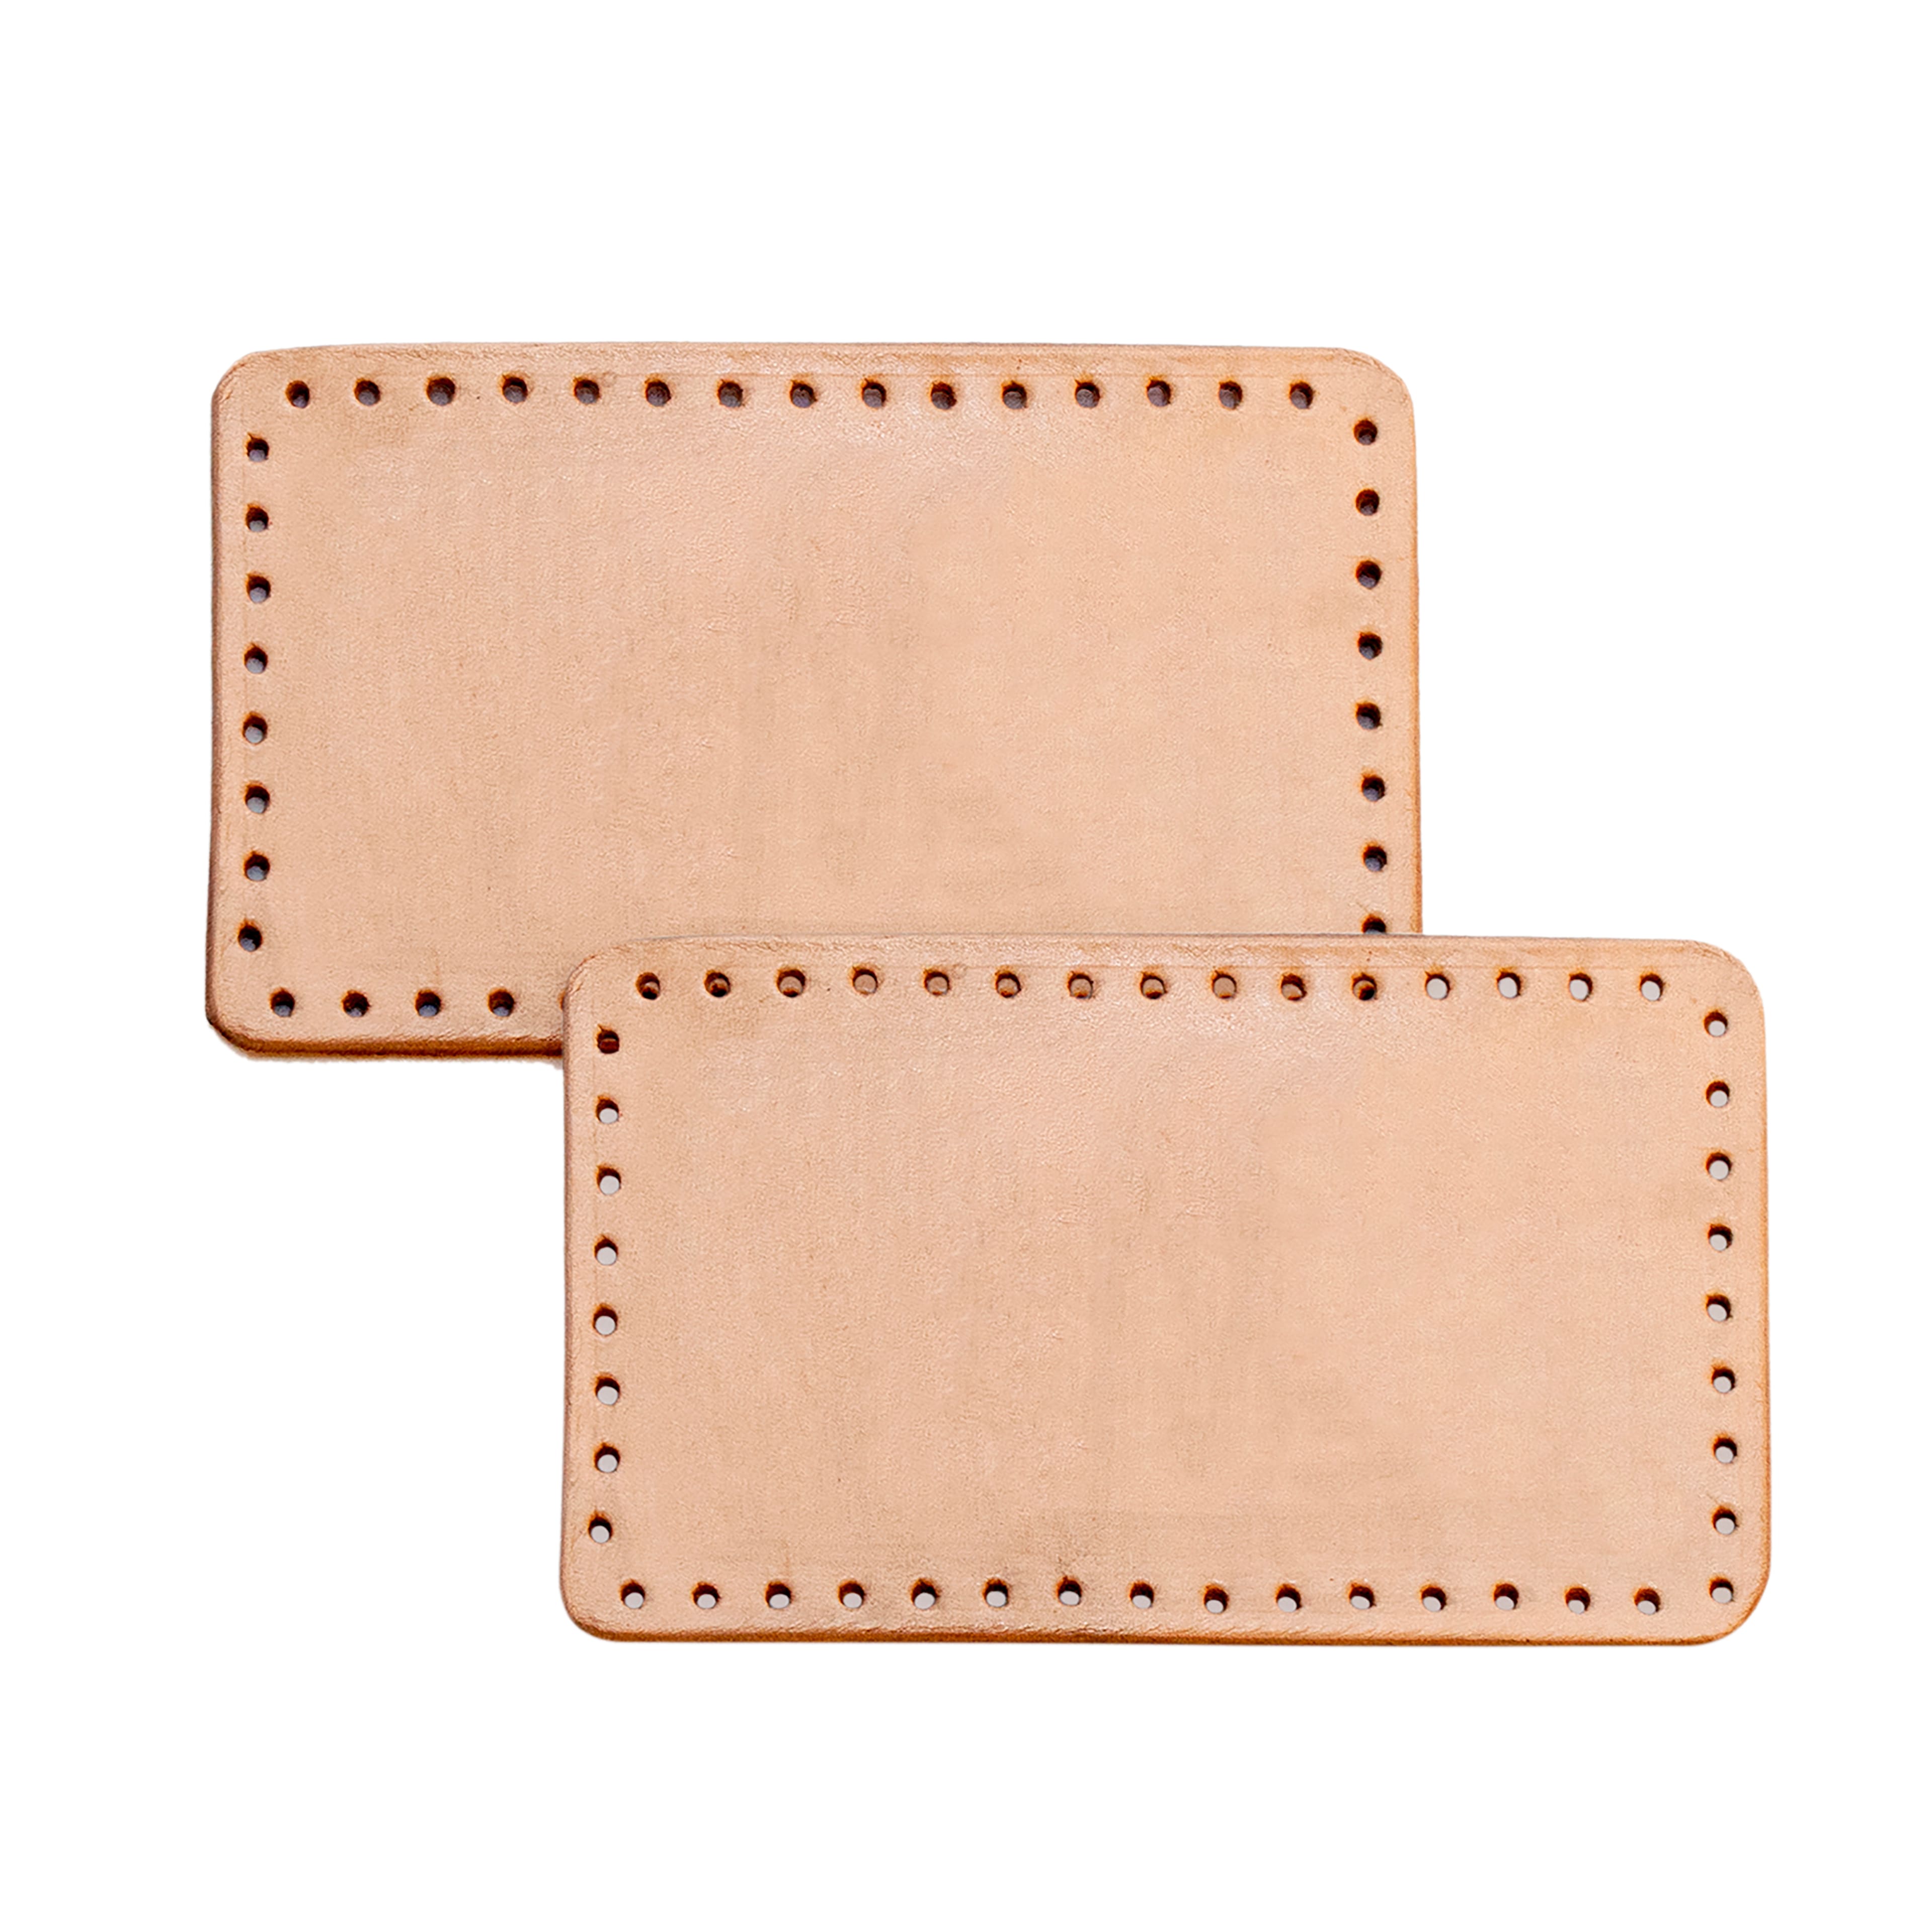 12 Packs: 2 ct. (24 total) Pre-Punch Leather Patches by ArtMinds™